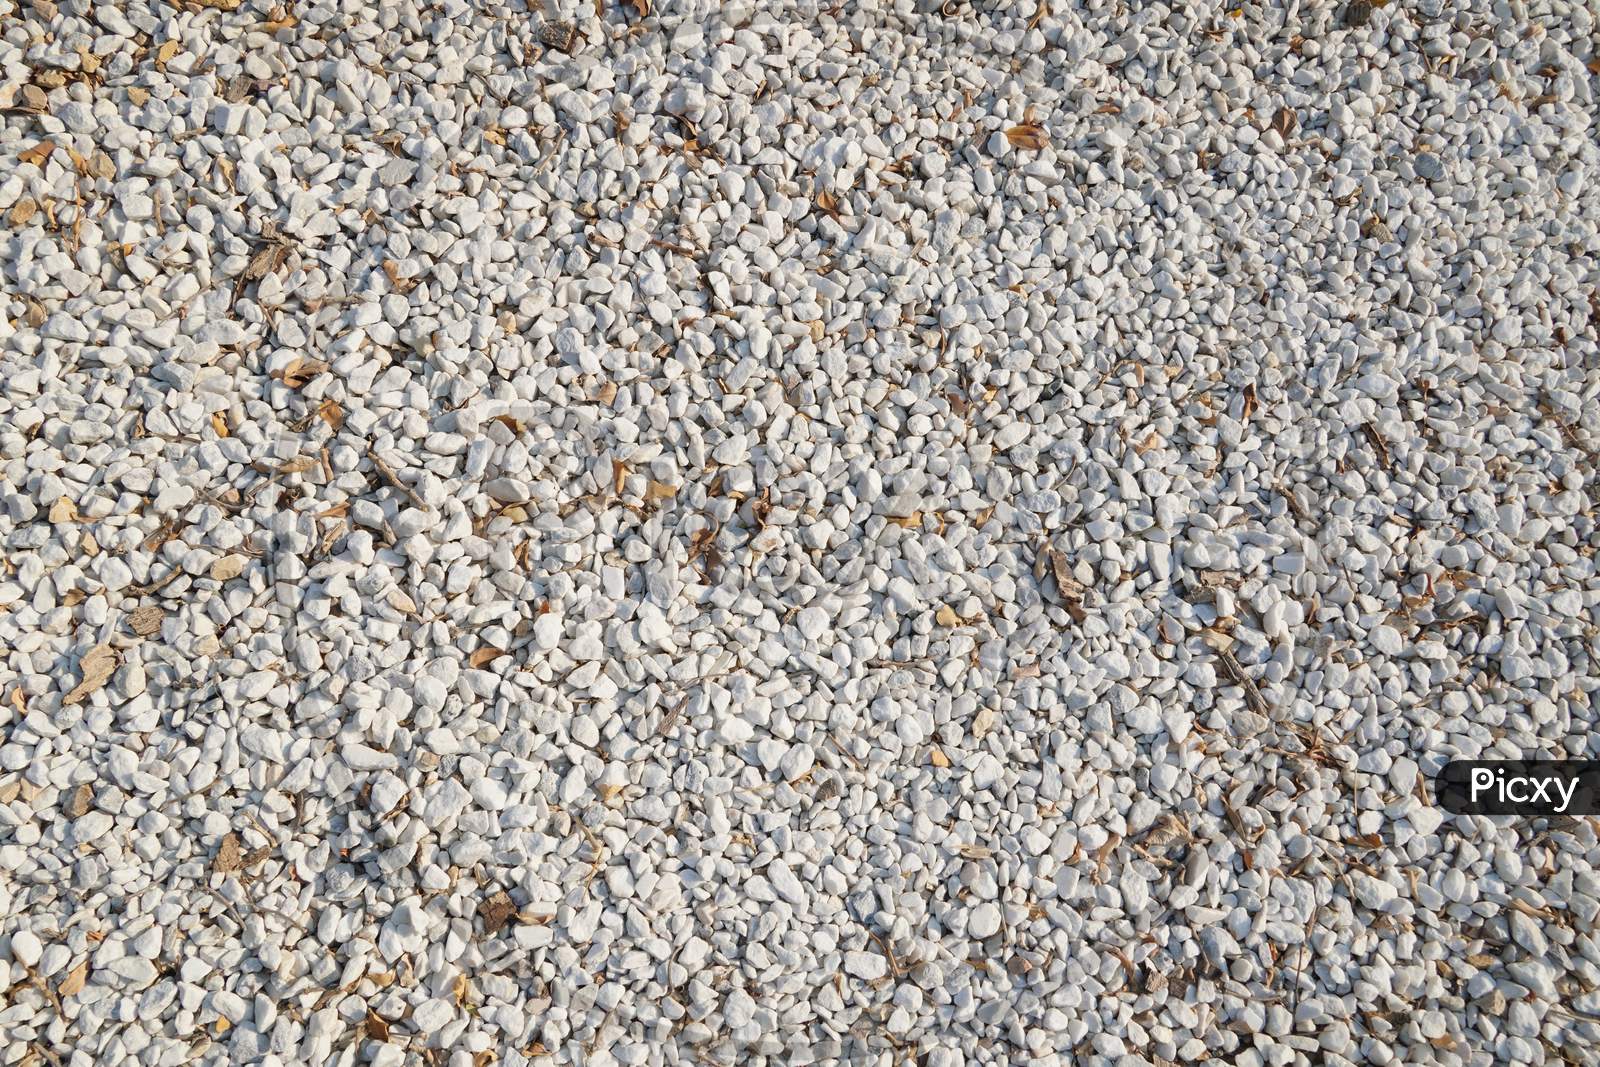 White And Brown Pebble Stone Texture For Background. The Texture Of Brown Gravel Stones.